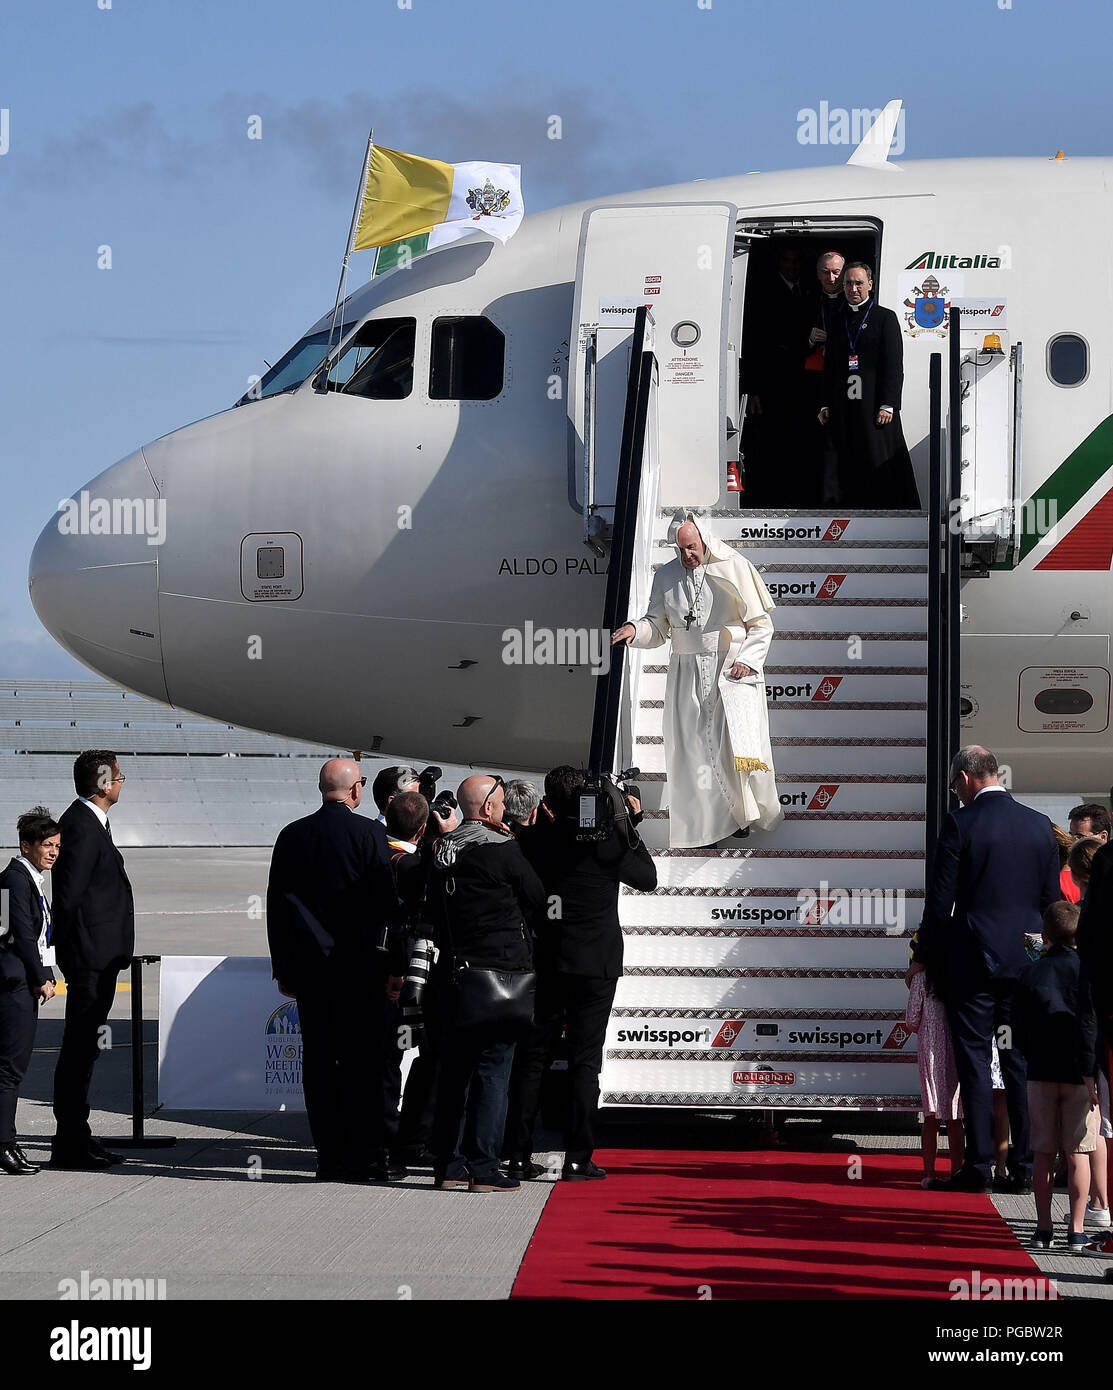 Pope Francis disembarks from the aircraft as he arrives at Dublin Airport as he arrives at Dublin Airport as he arrives at Dublin International Airport, at the start of his visit to Ireland. Stock Photo